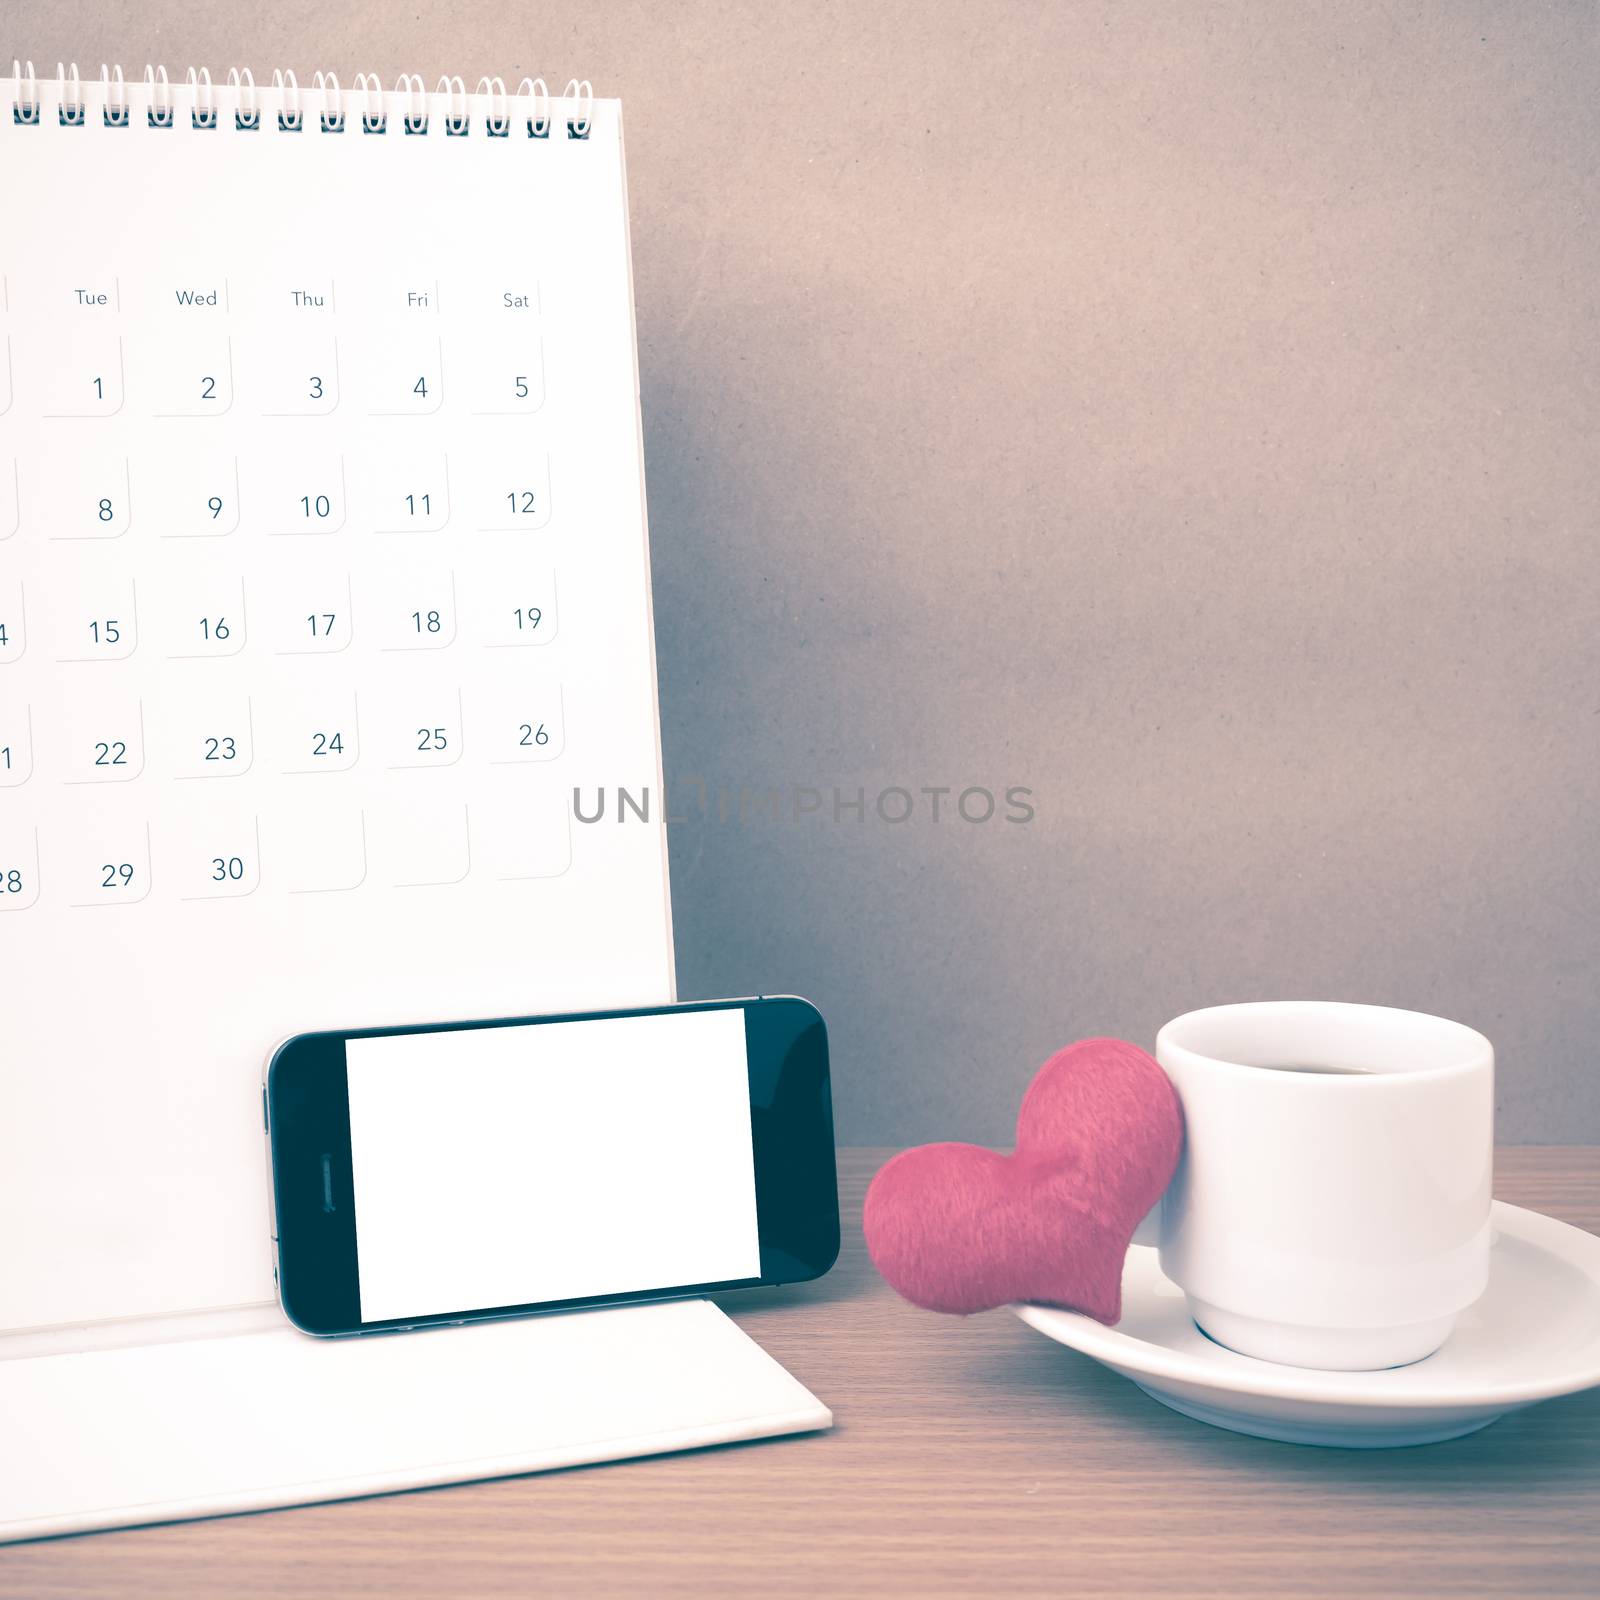 coffee,phone,calendar and heart on wood table background vintage style